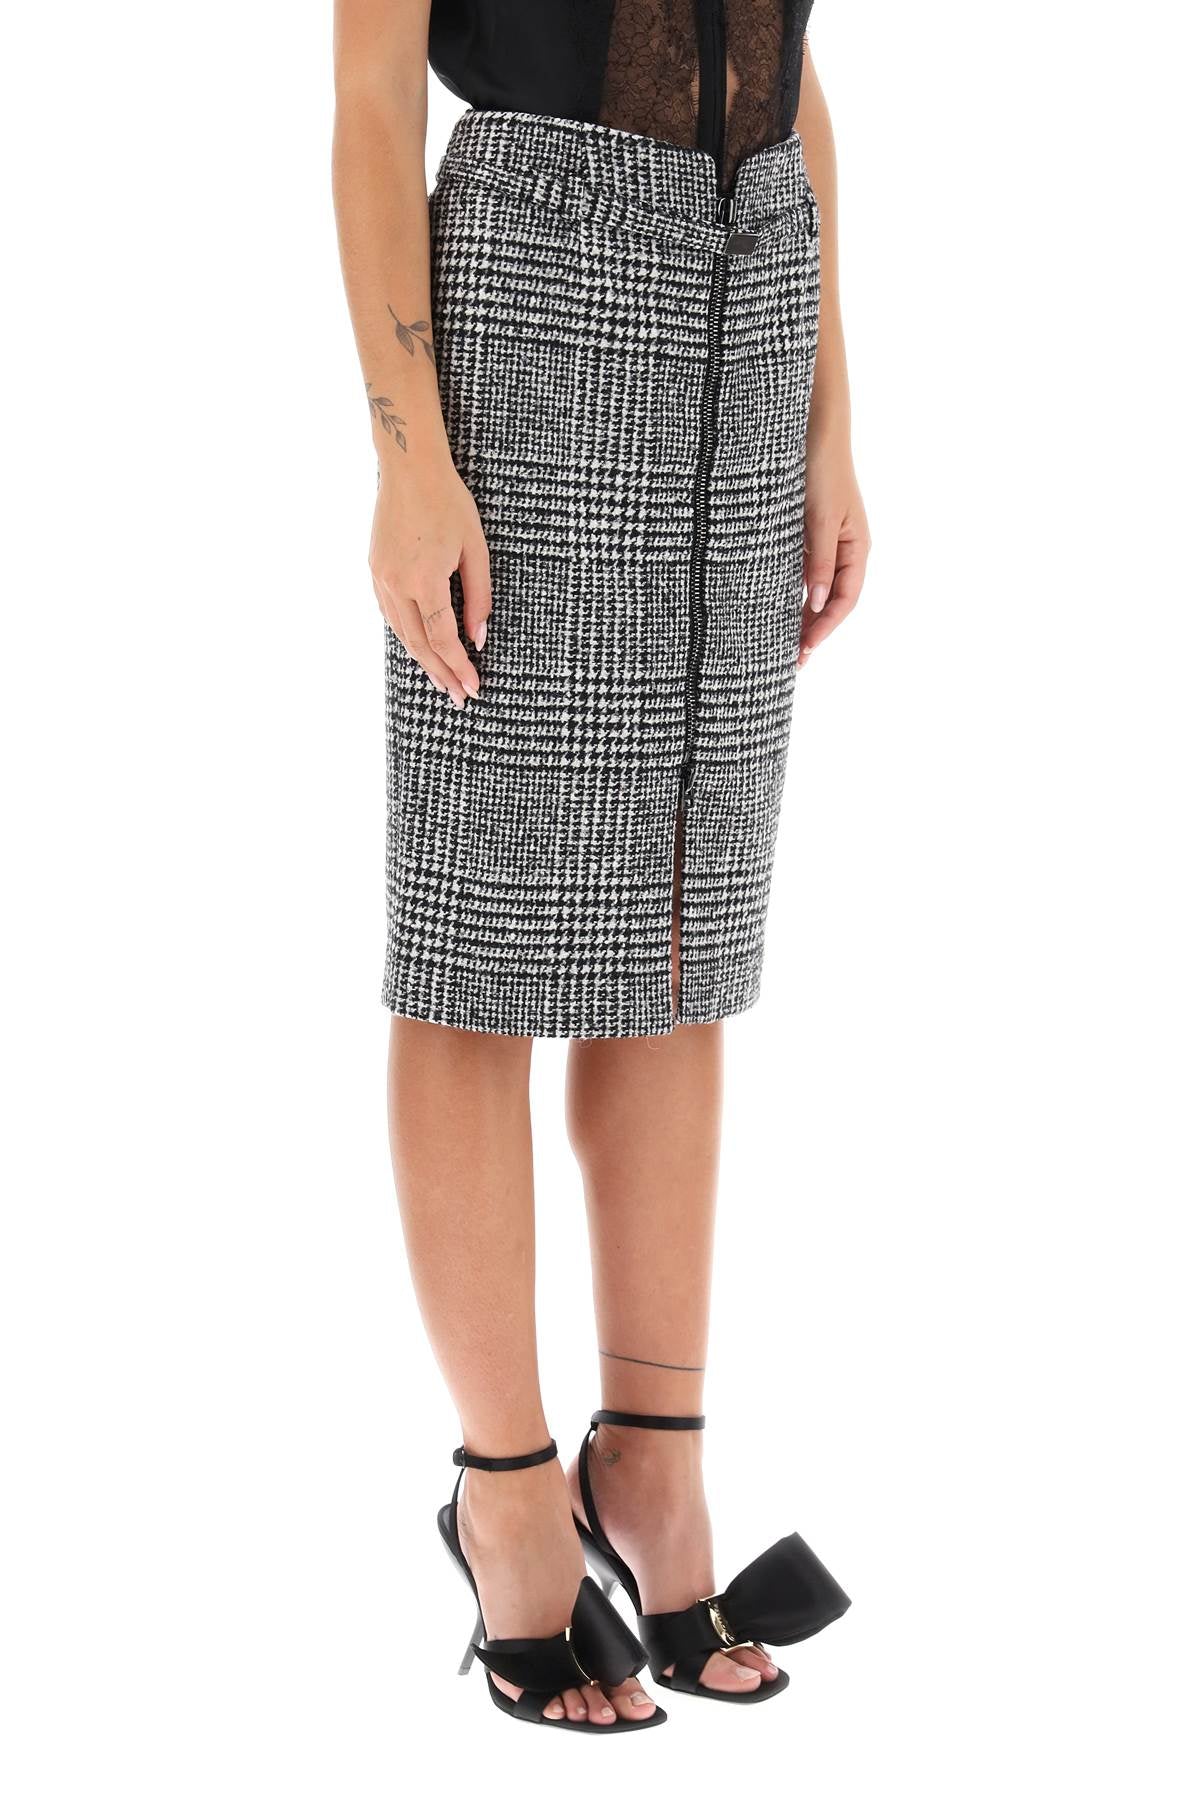 TOM FORD Multicolor Houndstooth Skirt with Coordinated Waist Belt